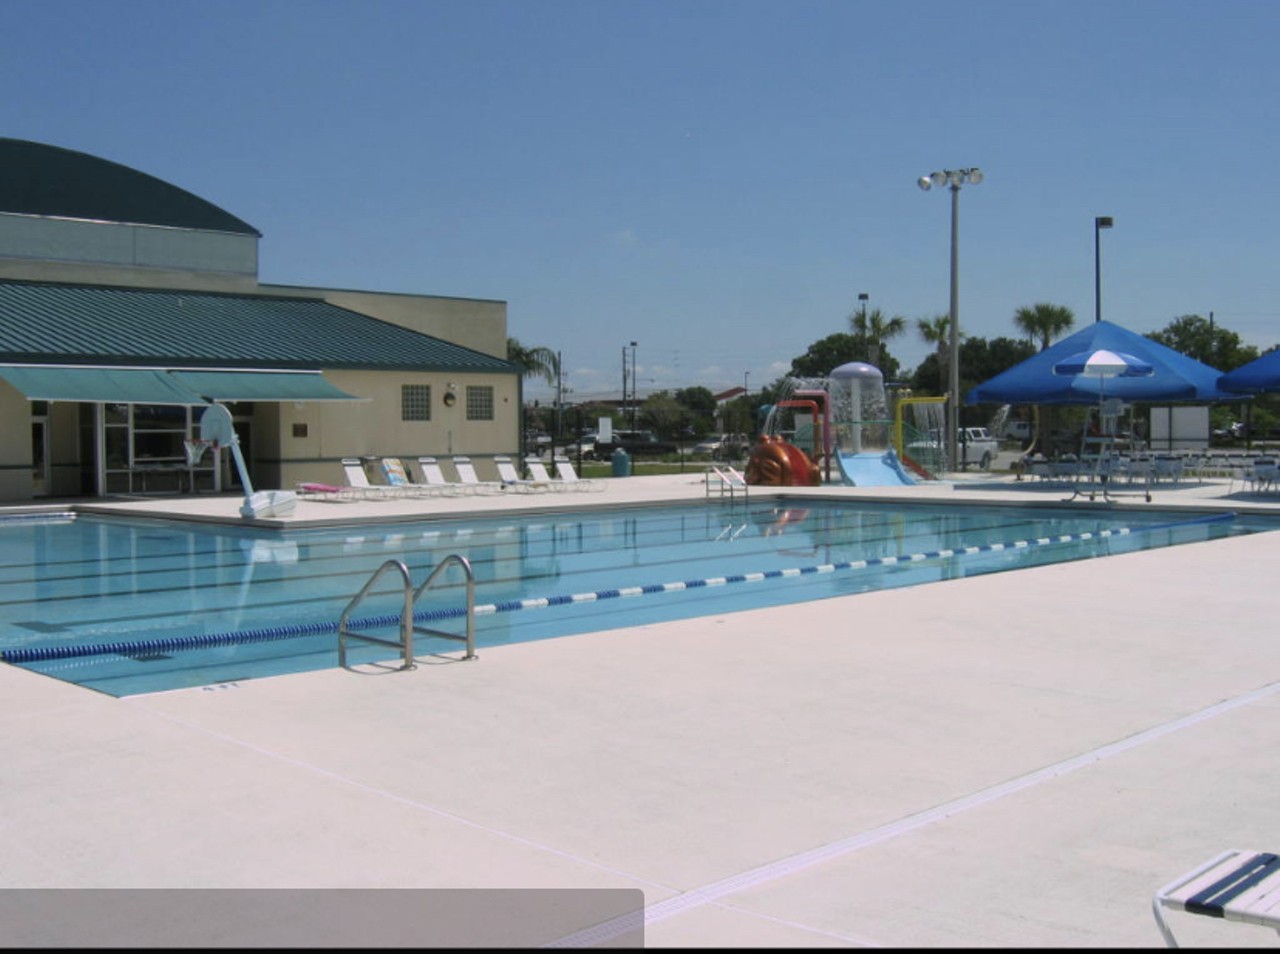 Seminole Aquatic Center 
9100 113th St., Seminole, FL 33772, (727) 397-6085
The pool is open during the summer Monday through Friday from 1-4 p.m. and 6-8 p.m., and Saturday 10 a.m. to 2 p.m. The fee for members is $2 and for non-members is $4.  
Photo via Seminole Recreation Division